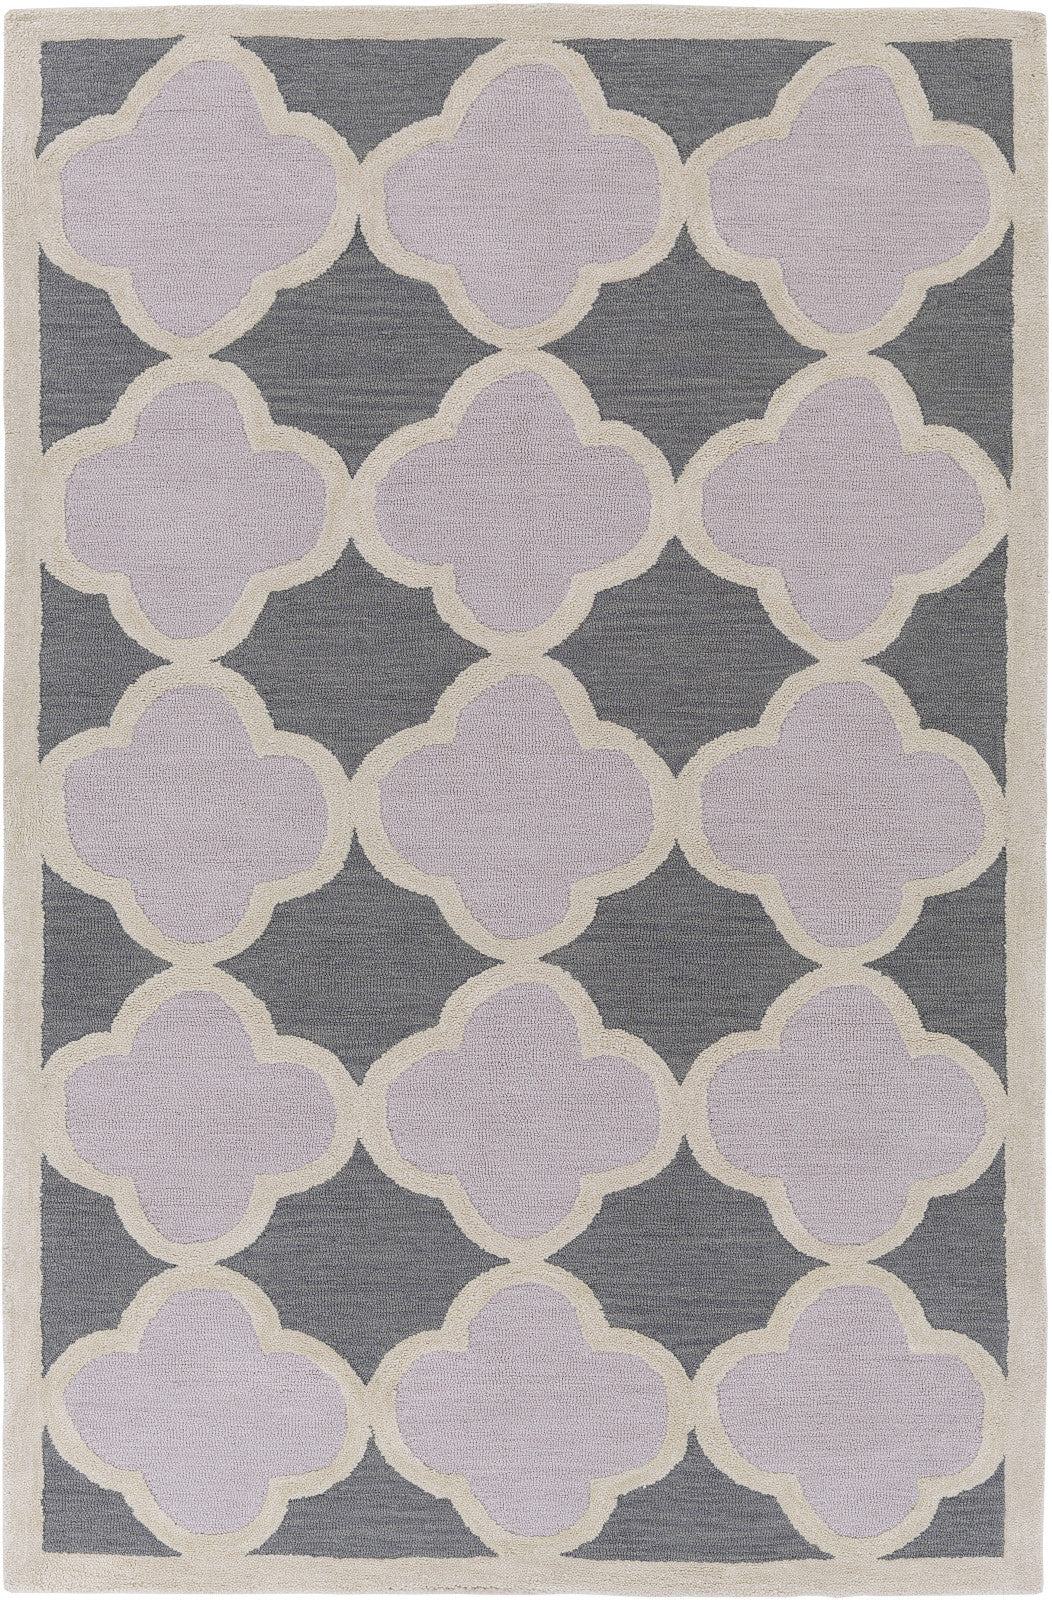 Artistic Weavers Holden Maisie Lavender/Charcoal Area Rug main image